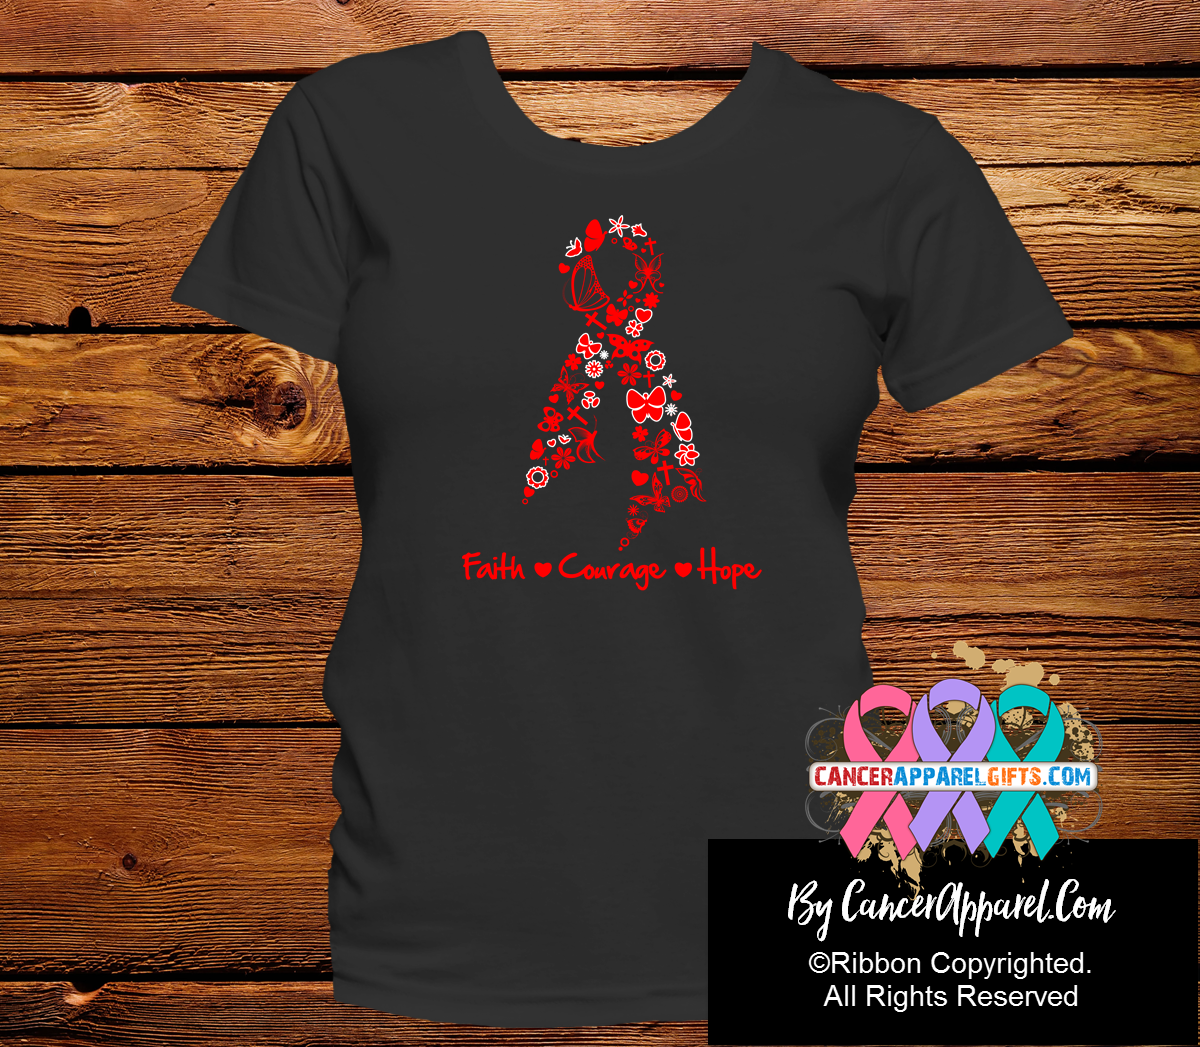 Red Ribbon Merchandise & Awareness Products